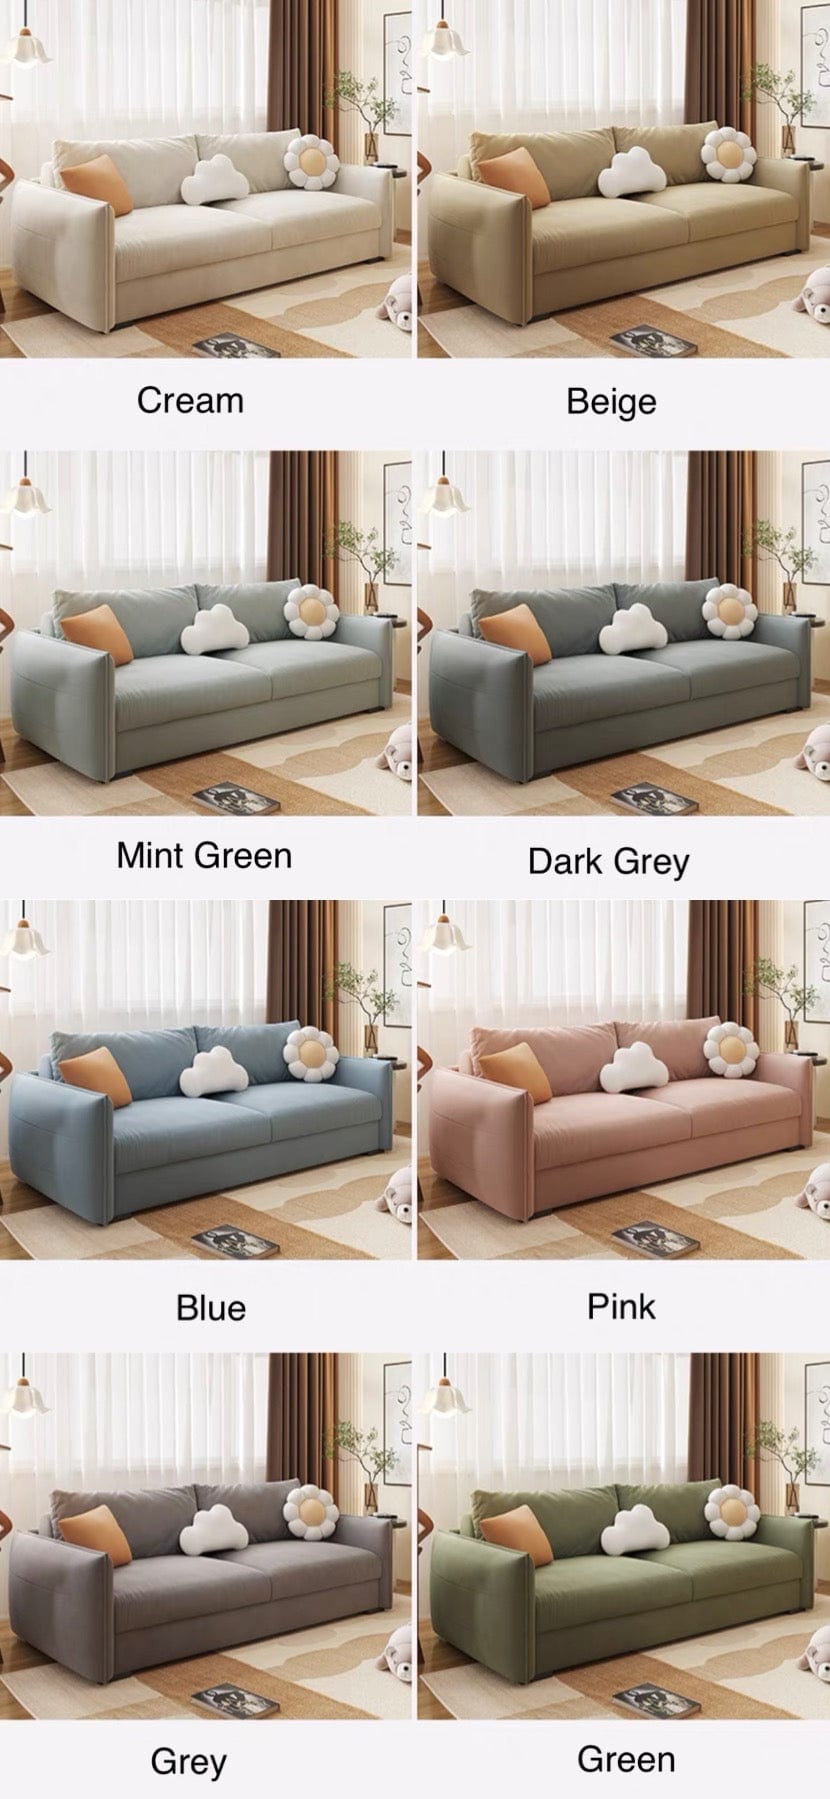 Home Atelier Karen Foldable Sofa Bed with Mattress